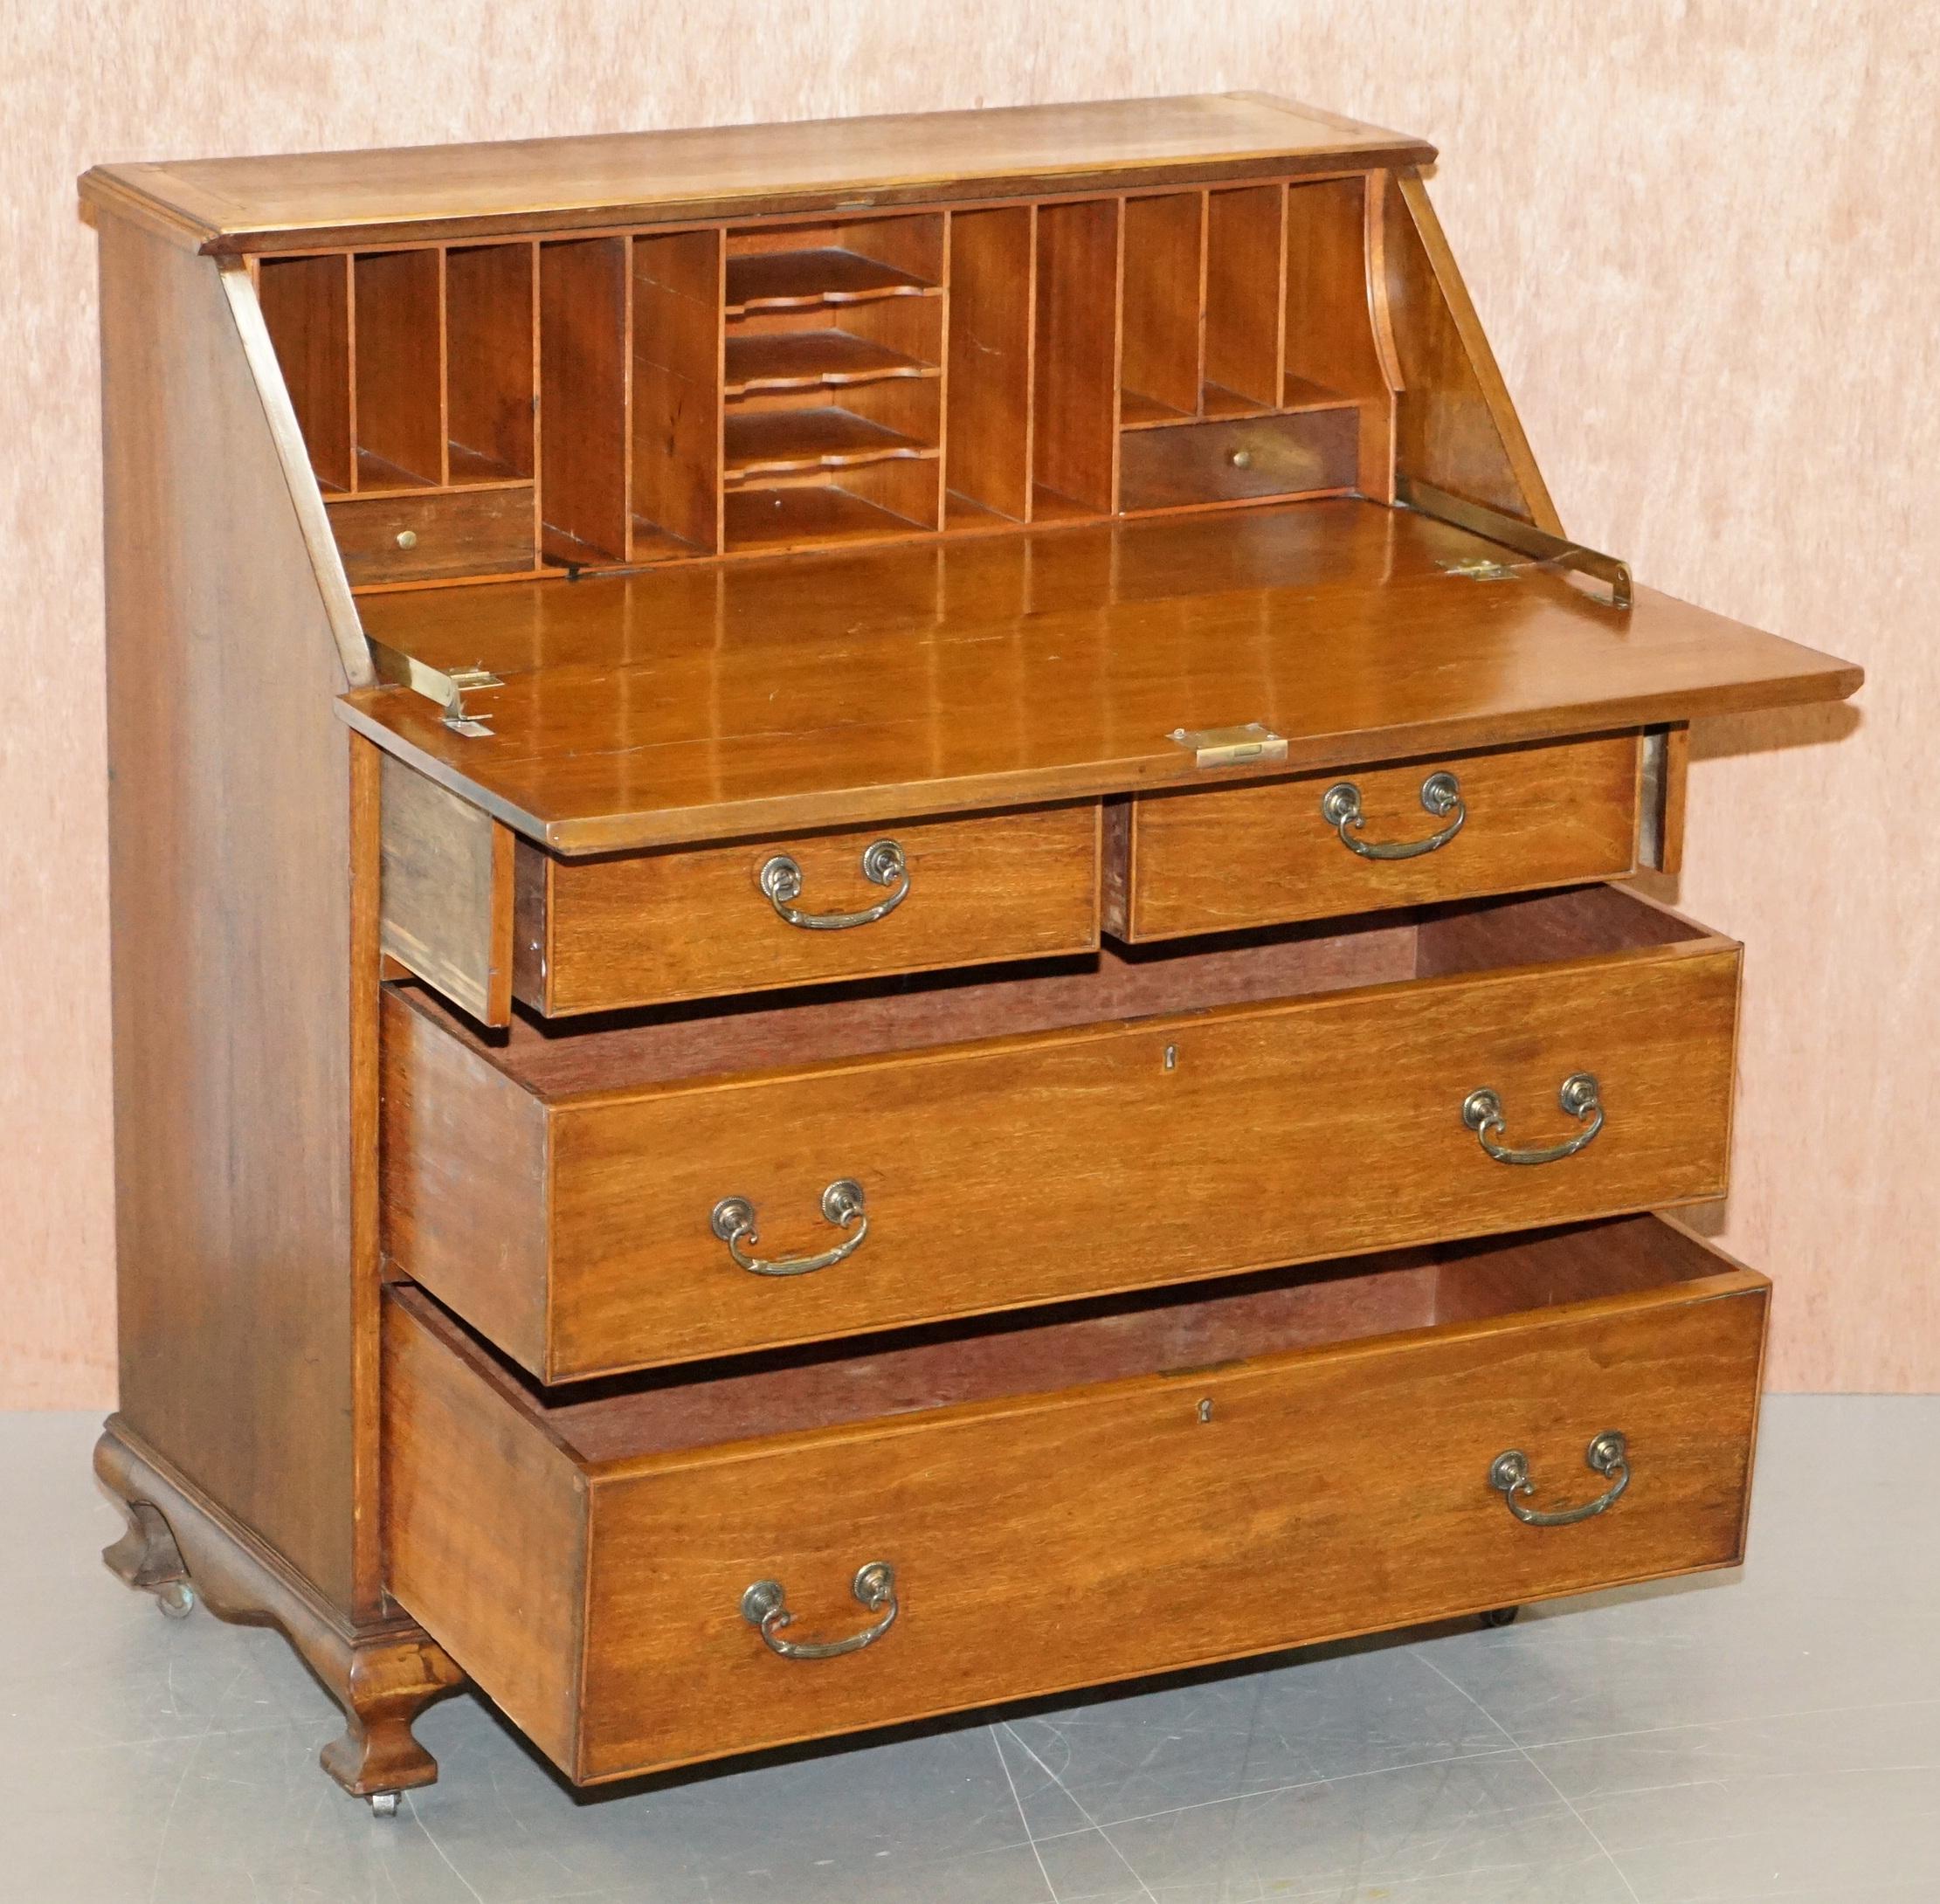 Lovely circa 1900 Solid Walnut Writing Bureau Chest of Drawers with Desk Top 9